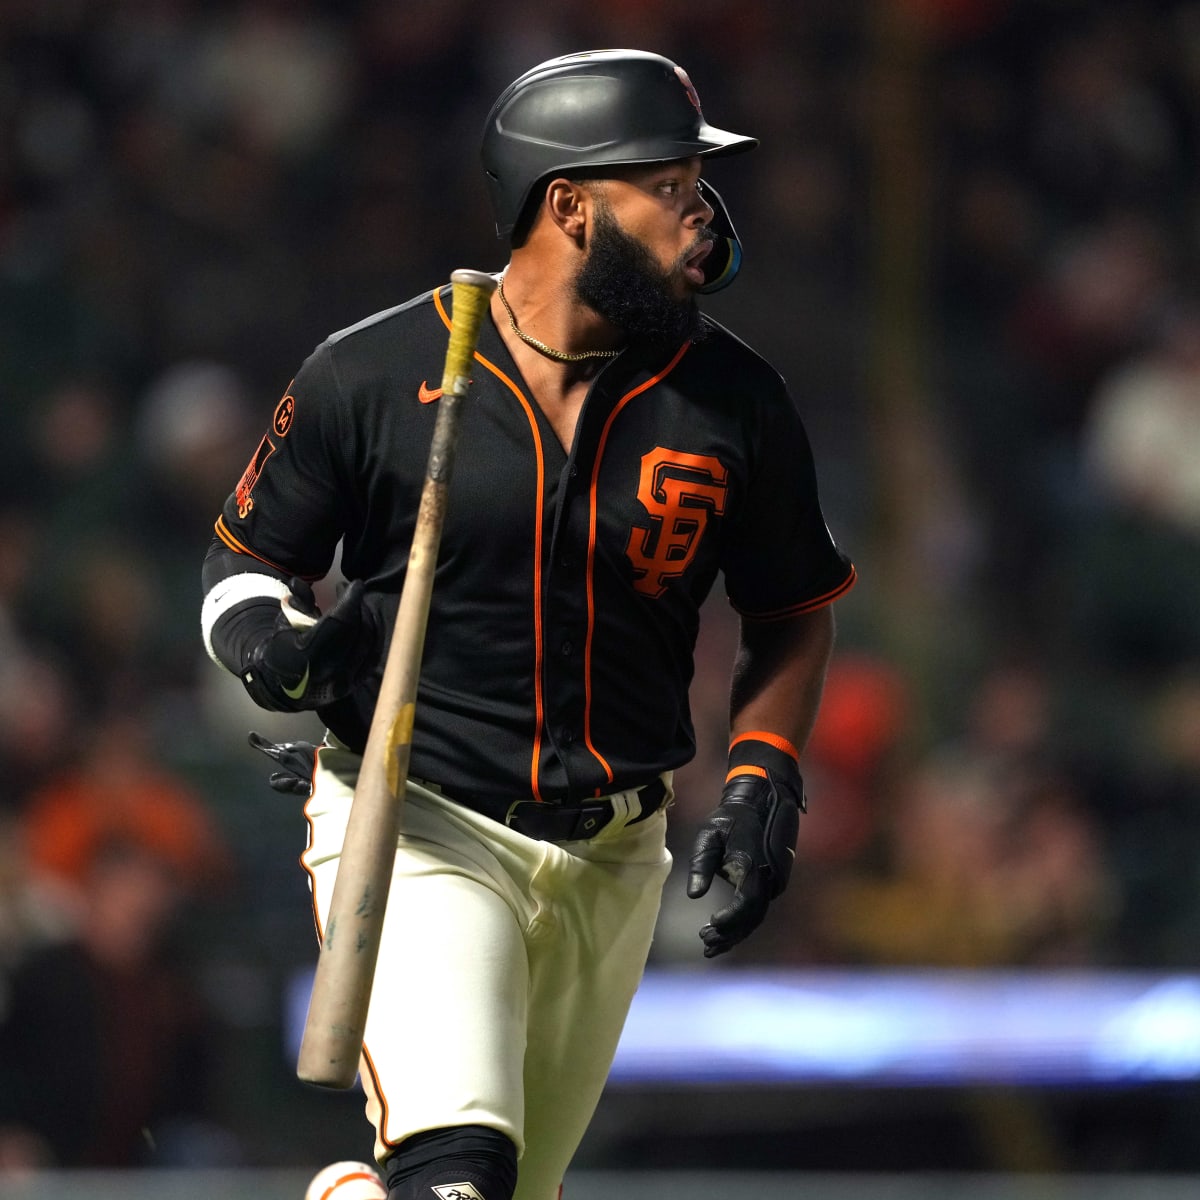 SF Giants rookie catcher Patrick Bailey named Gold Glove finalist